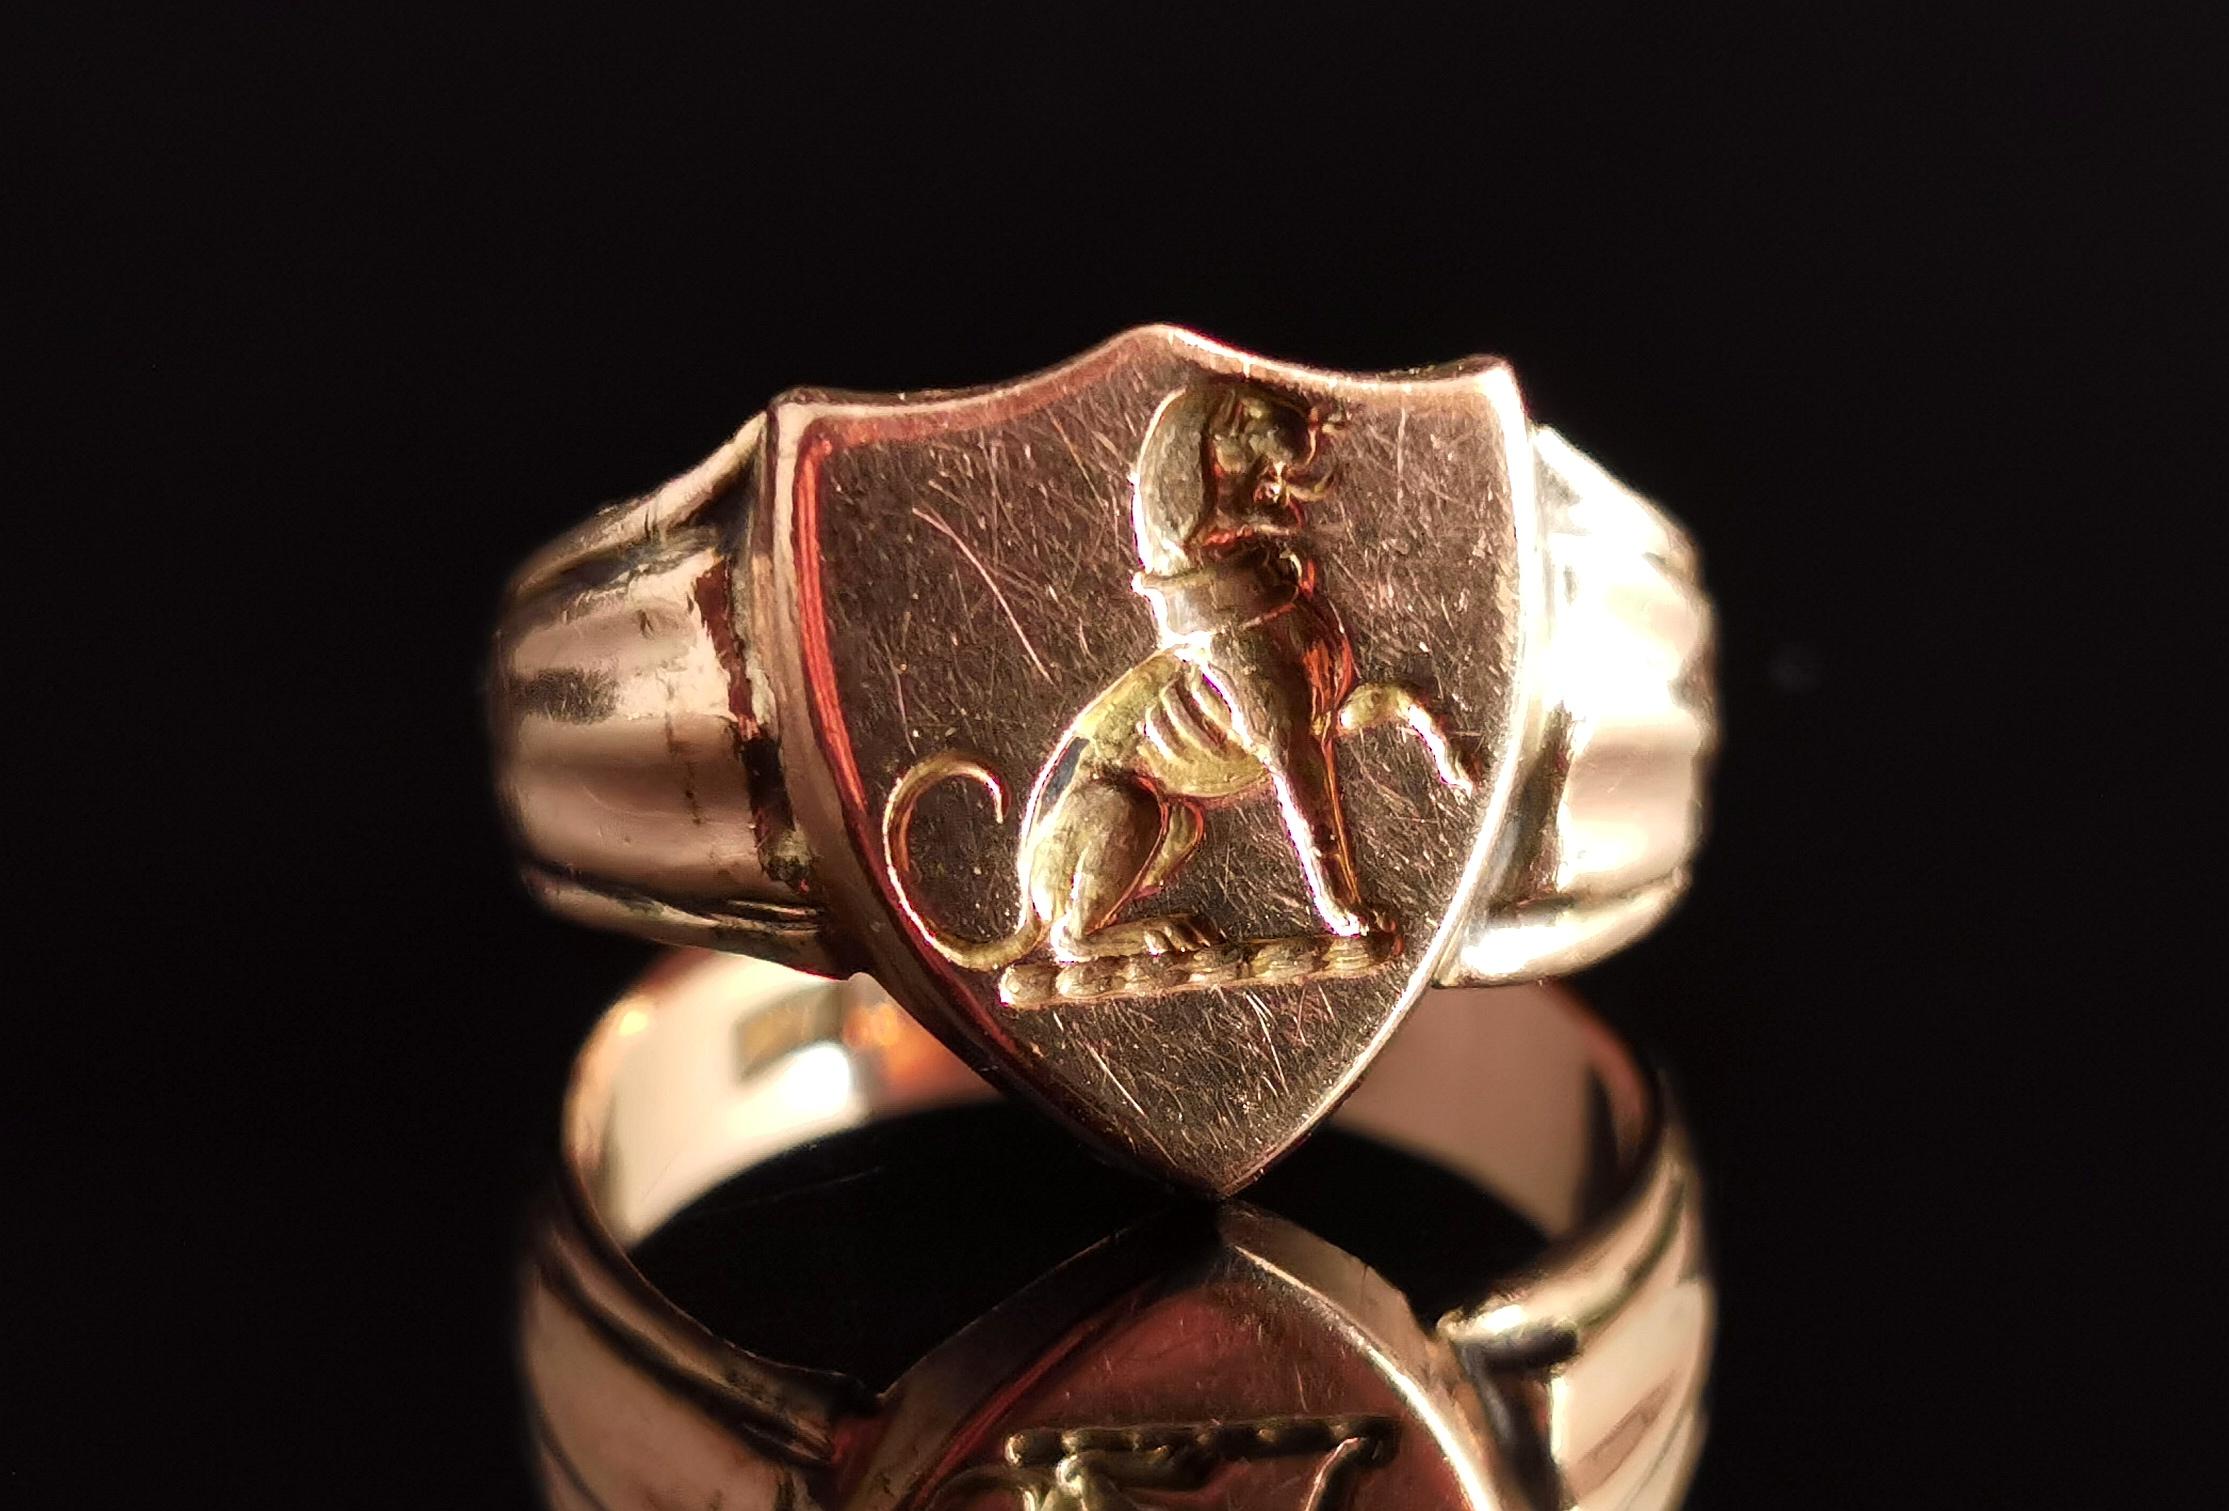 A handsome and regal antique 9kt yellow gold Signet ring.

This is a shield shaped signet ring which lends its shape well to the regal heraldic lion that is sat, paw lifted, deeply engraved into the shield face.

The lion has historically